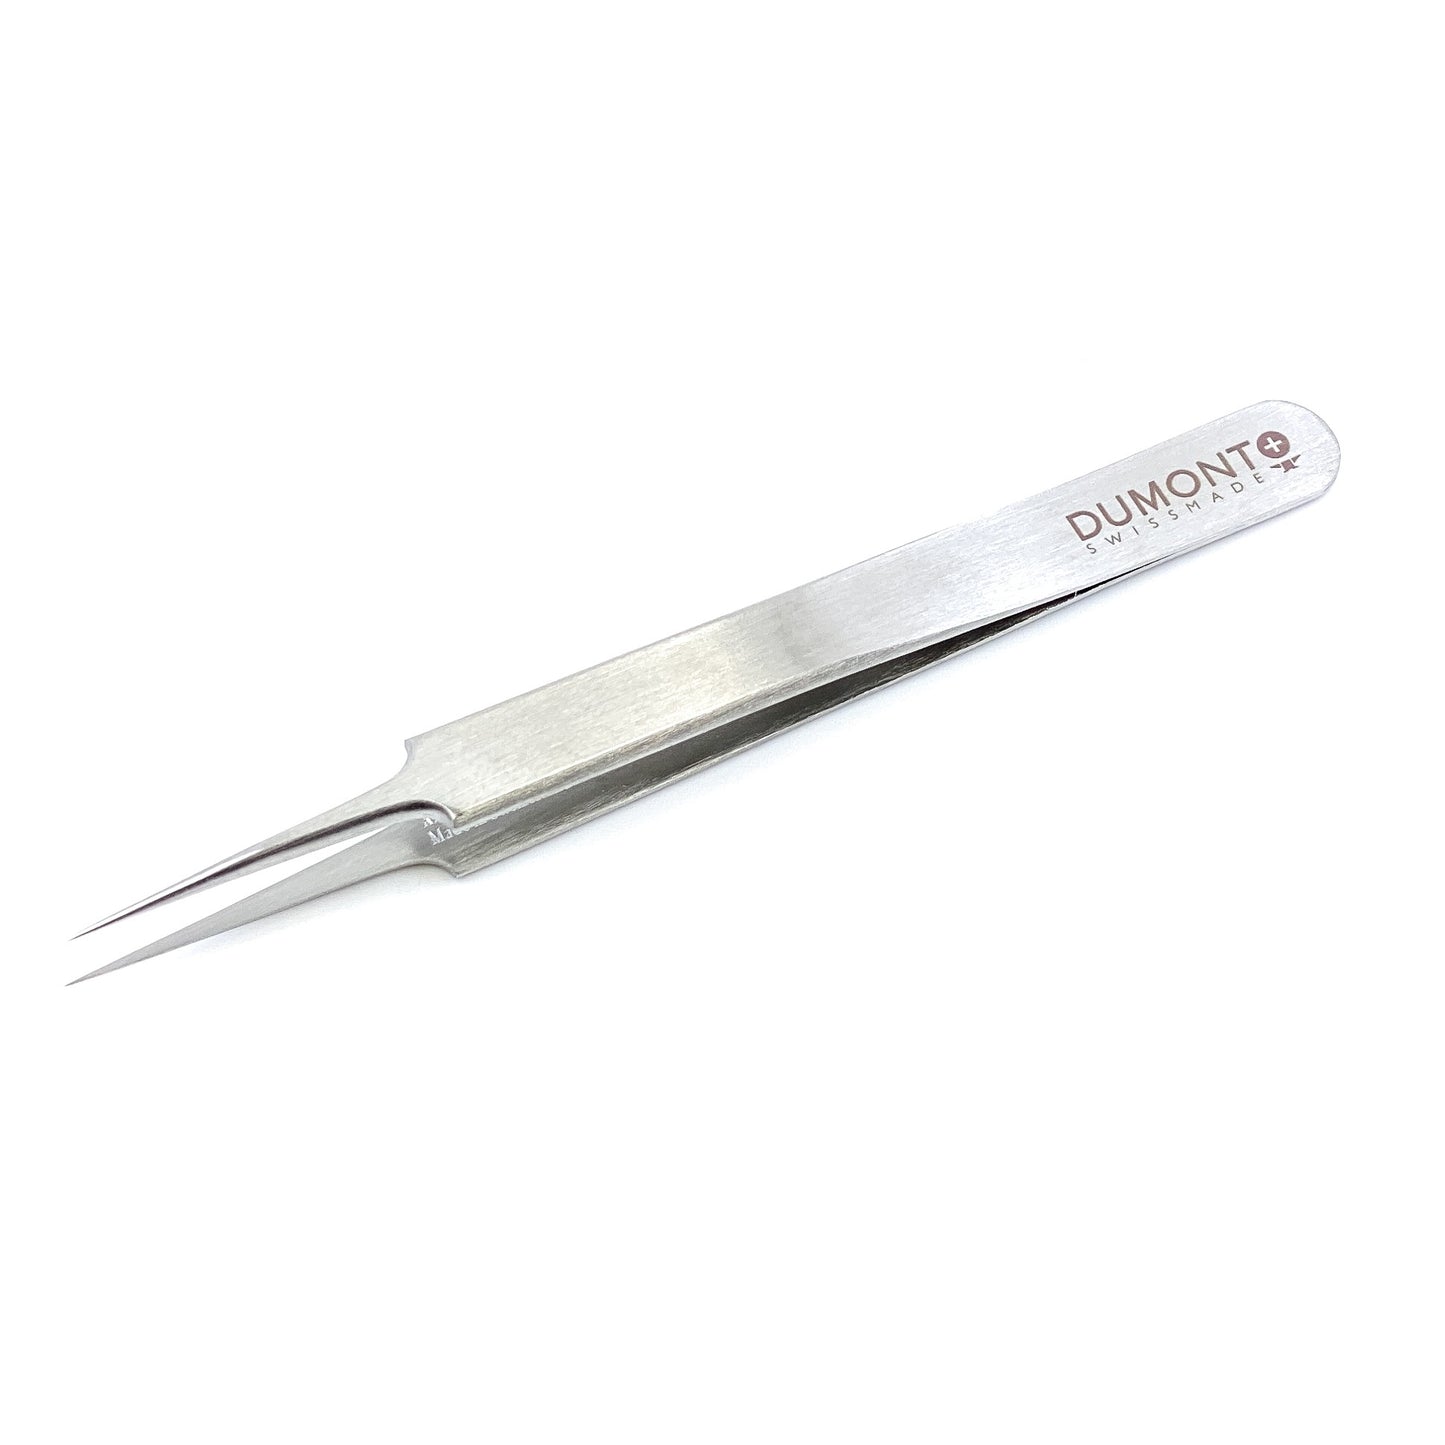 Swiss Knotting Tweezers with Leather Cover